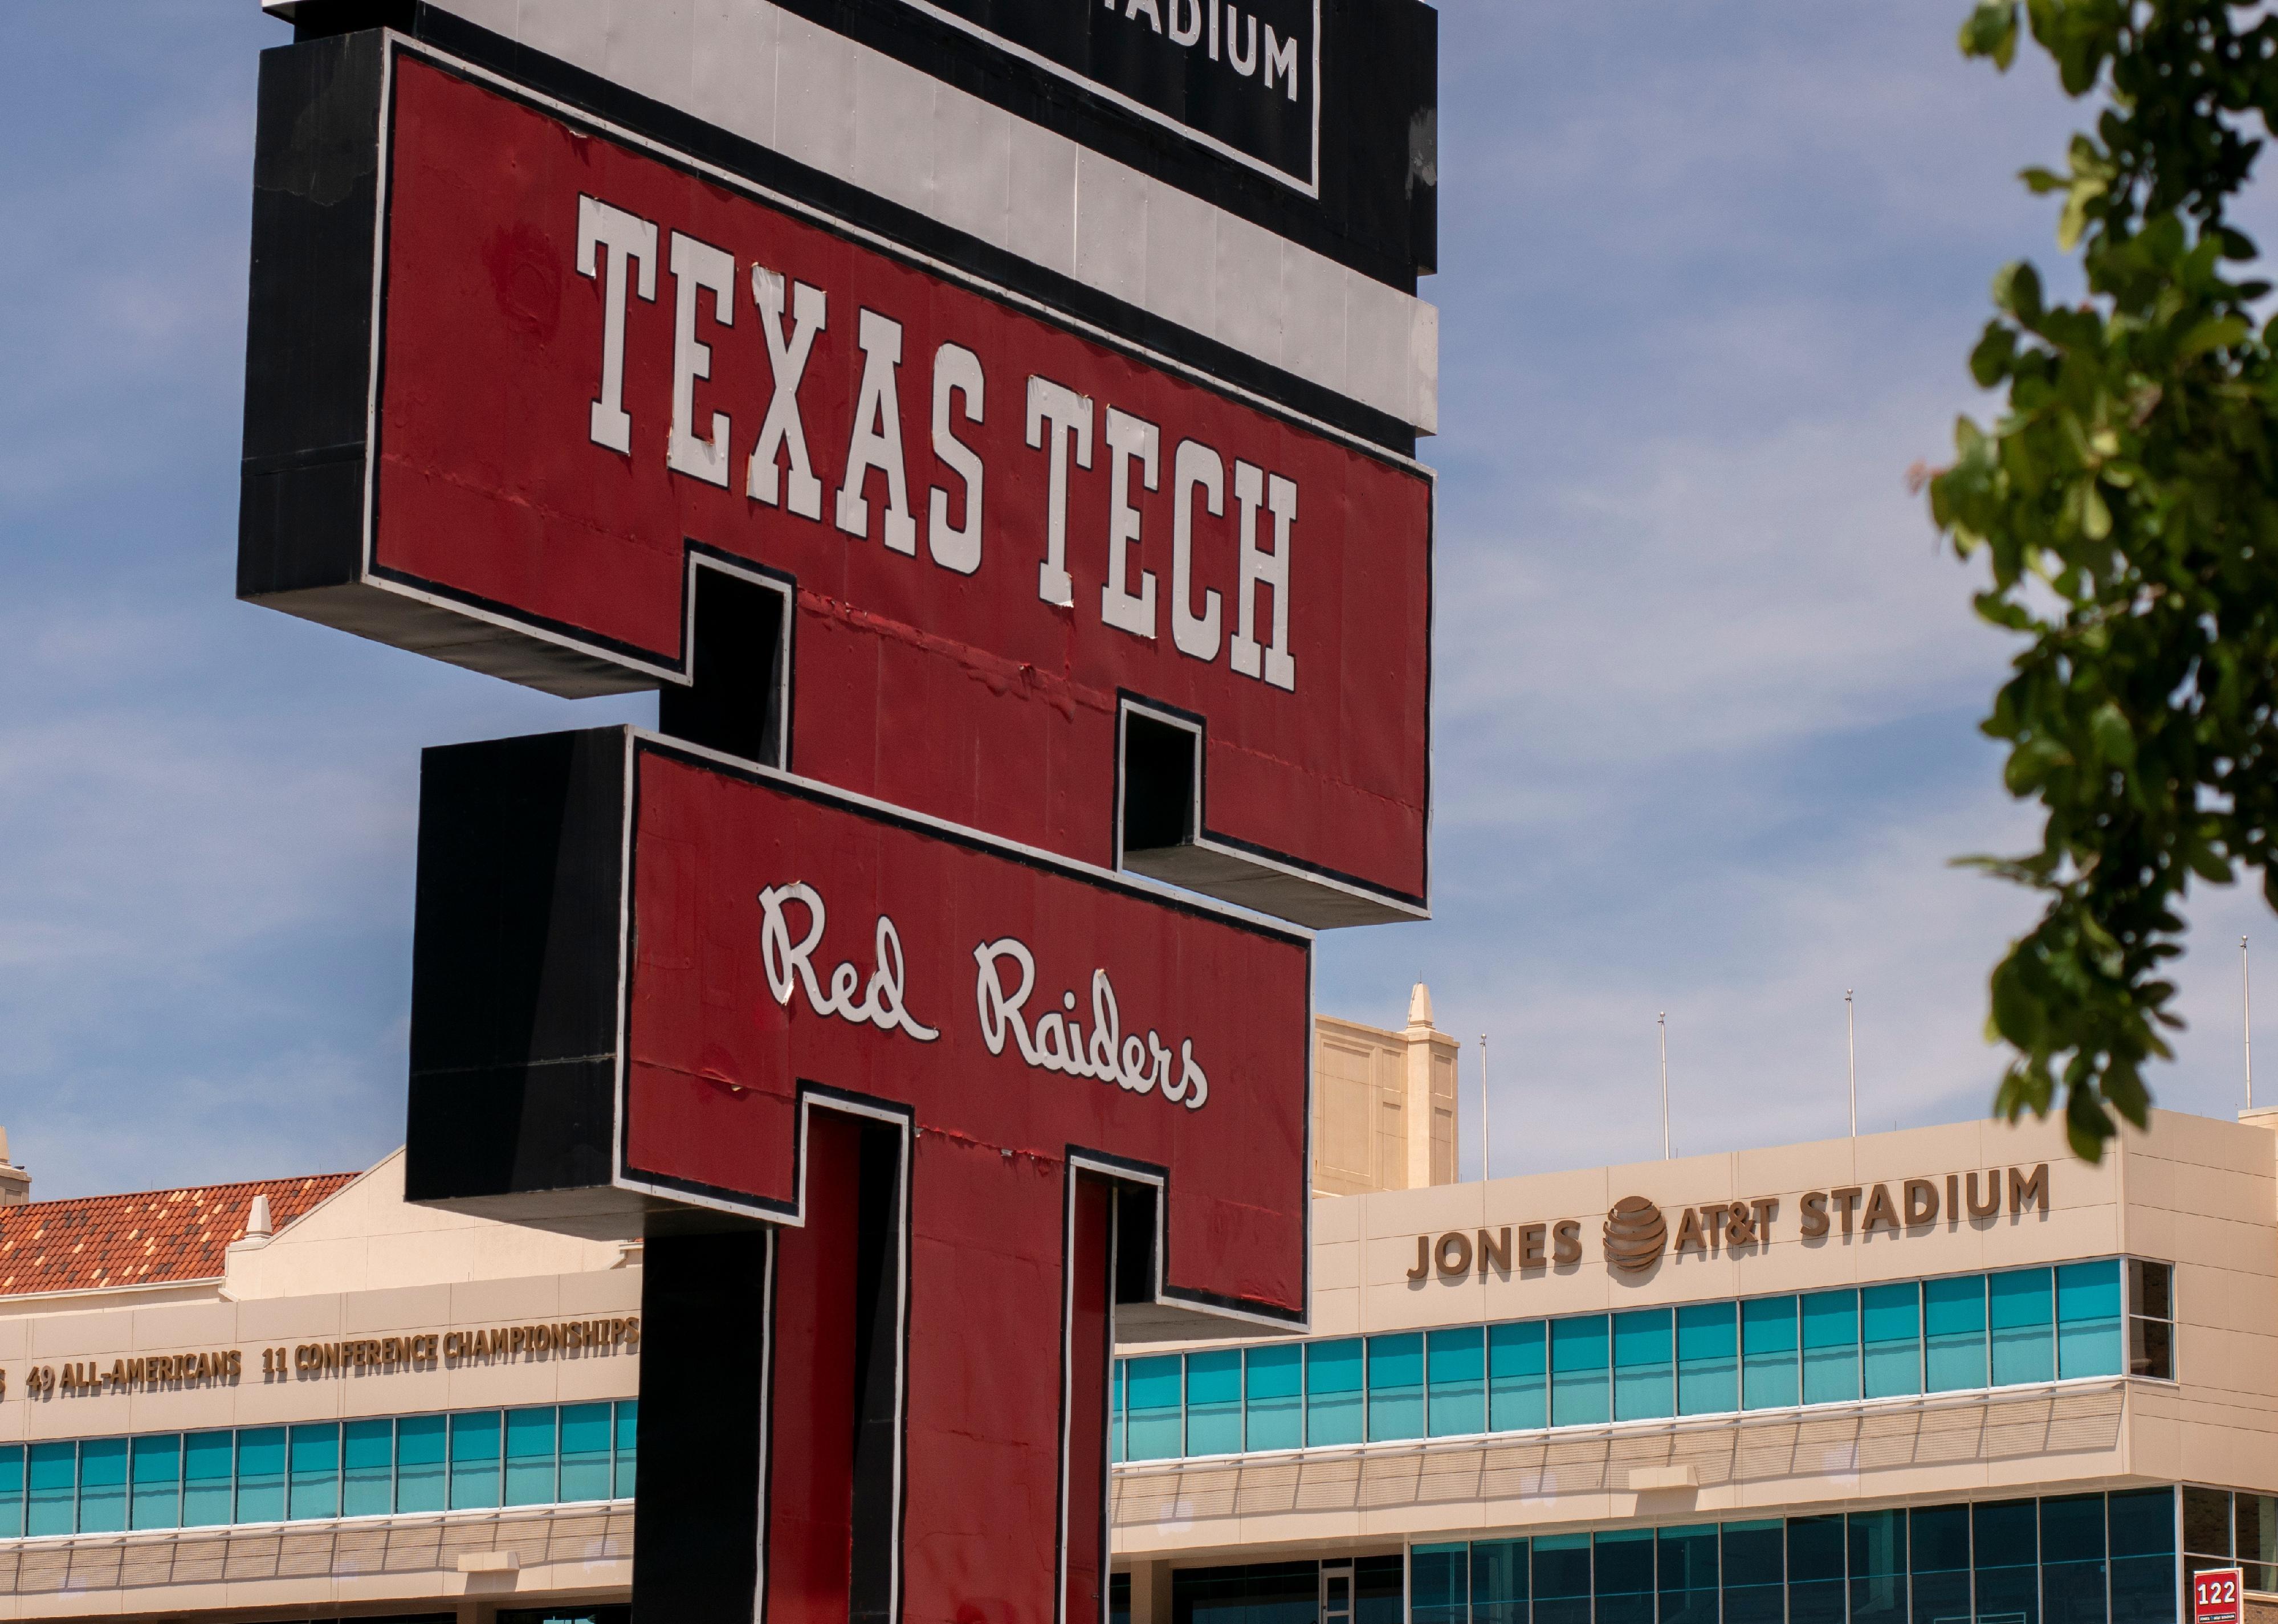 Texas Tech University sign and Red Raiders logo.